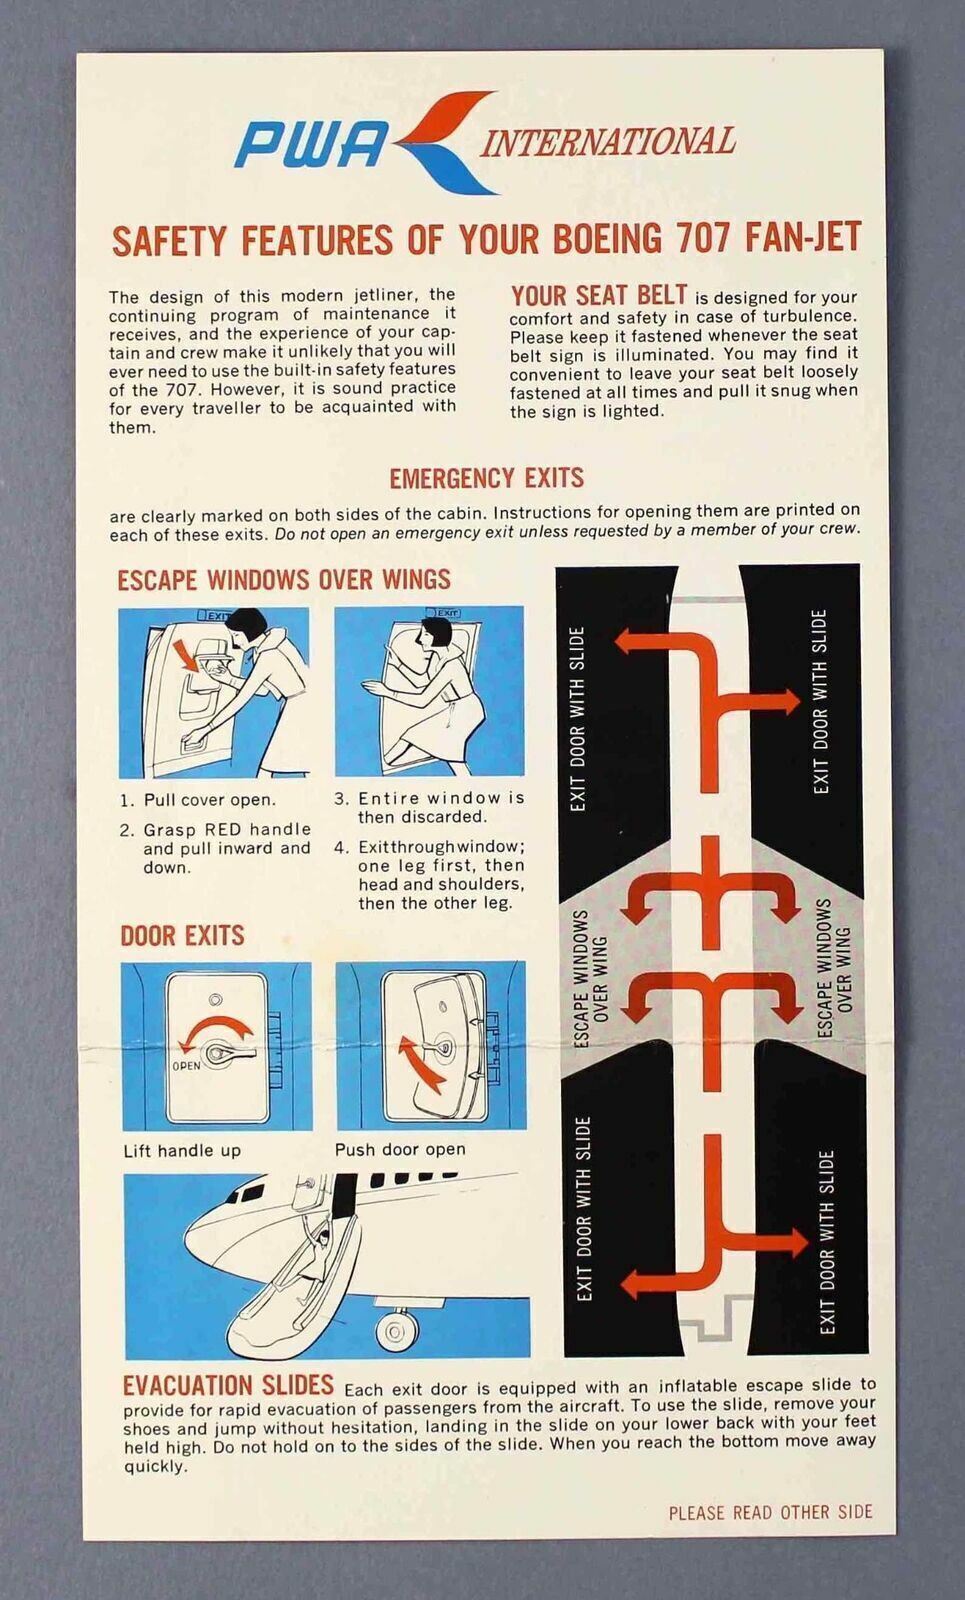 PWA INTERNATIONAL BOEING 707 VINTAGE SAFETY CARD PACIFIC WESTERN AIRLINES